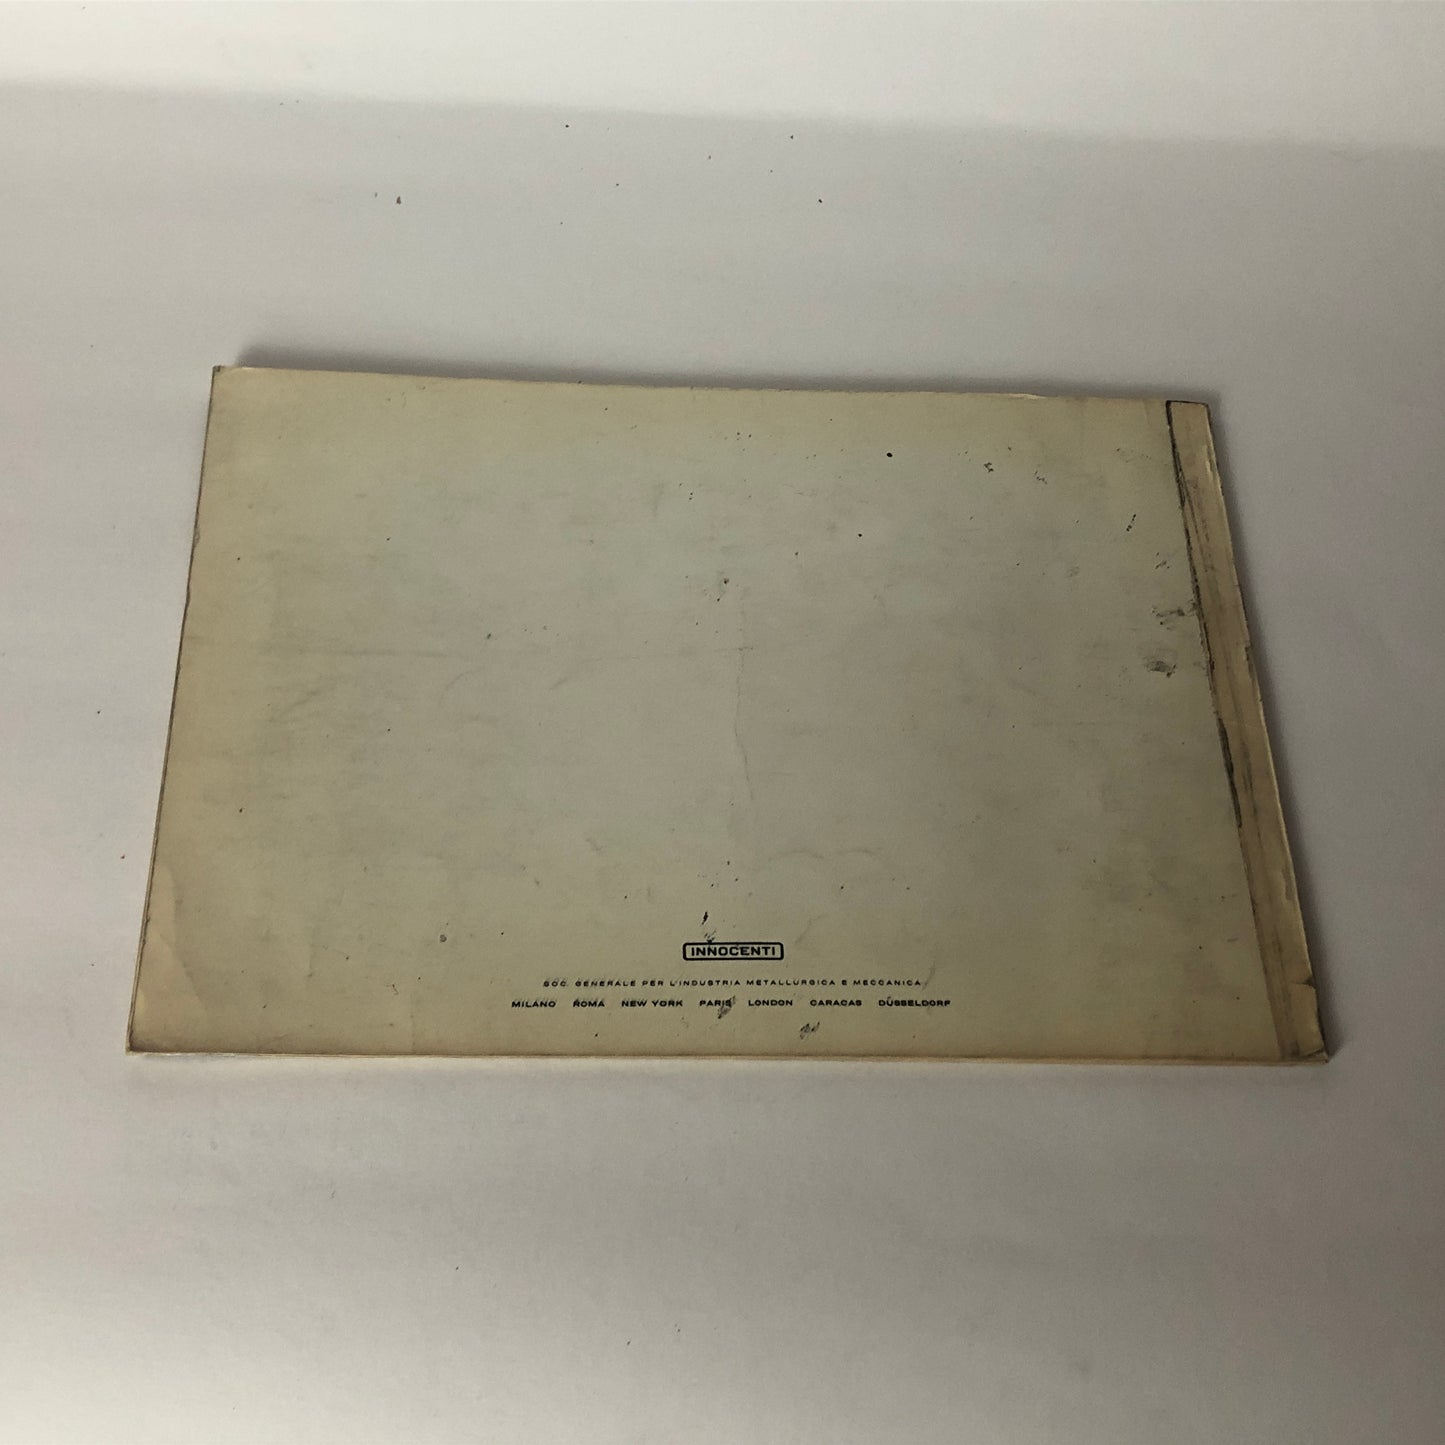 Innocenti, Price List No. 5 Spare Parts for SIDA Imported Cars Year 1967